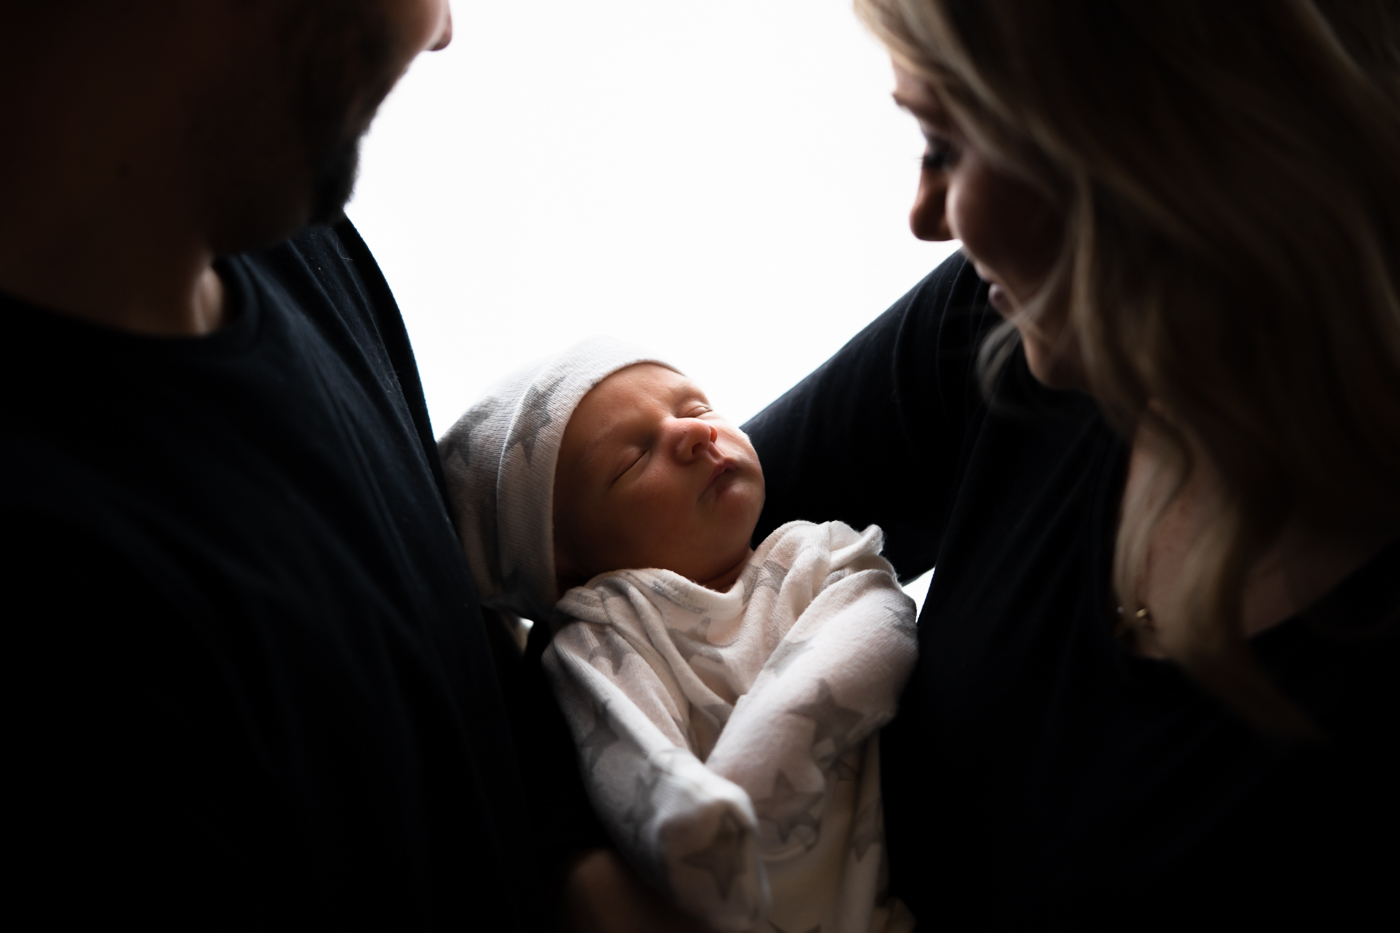 A close-up photograph of a mother and father holding their newborn baby boy in front of a white window. The parents are looking down at the baby with love and tenderness. The baby is wrapped in a blanket and is sleeping peacefully. The window is letting in natural light, which illuminates the scene.